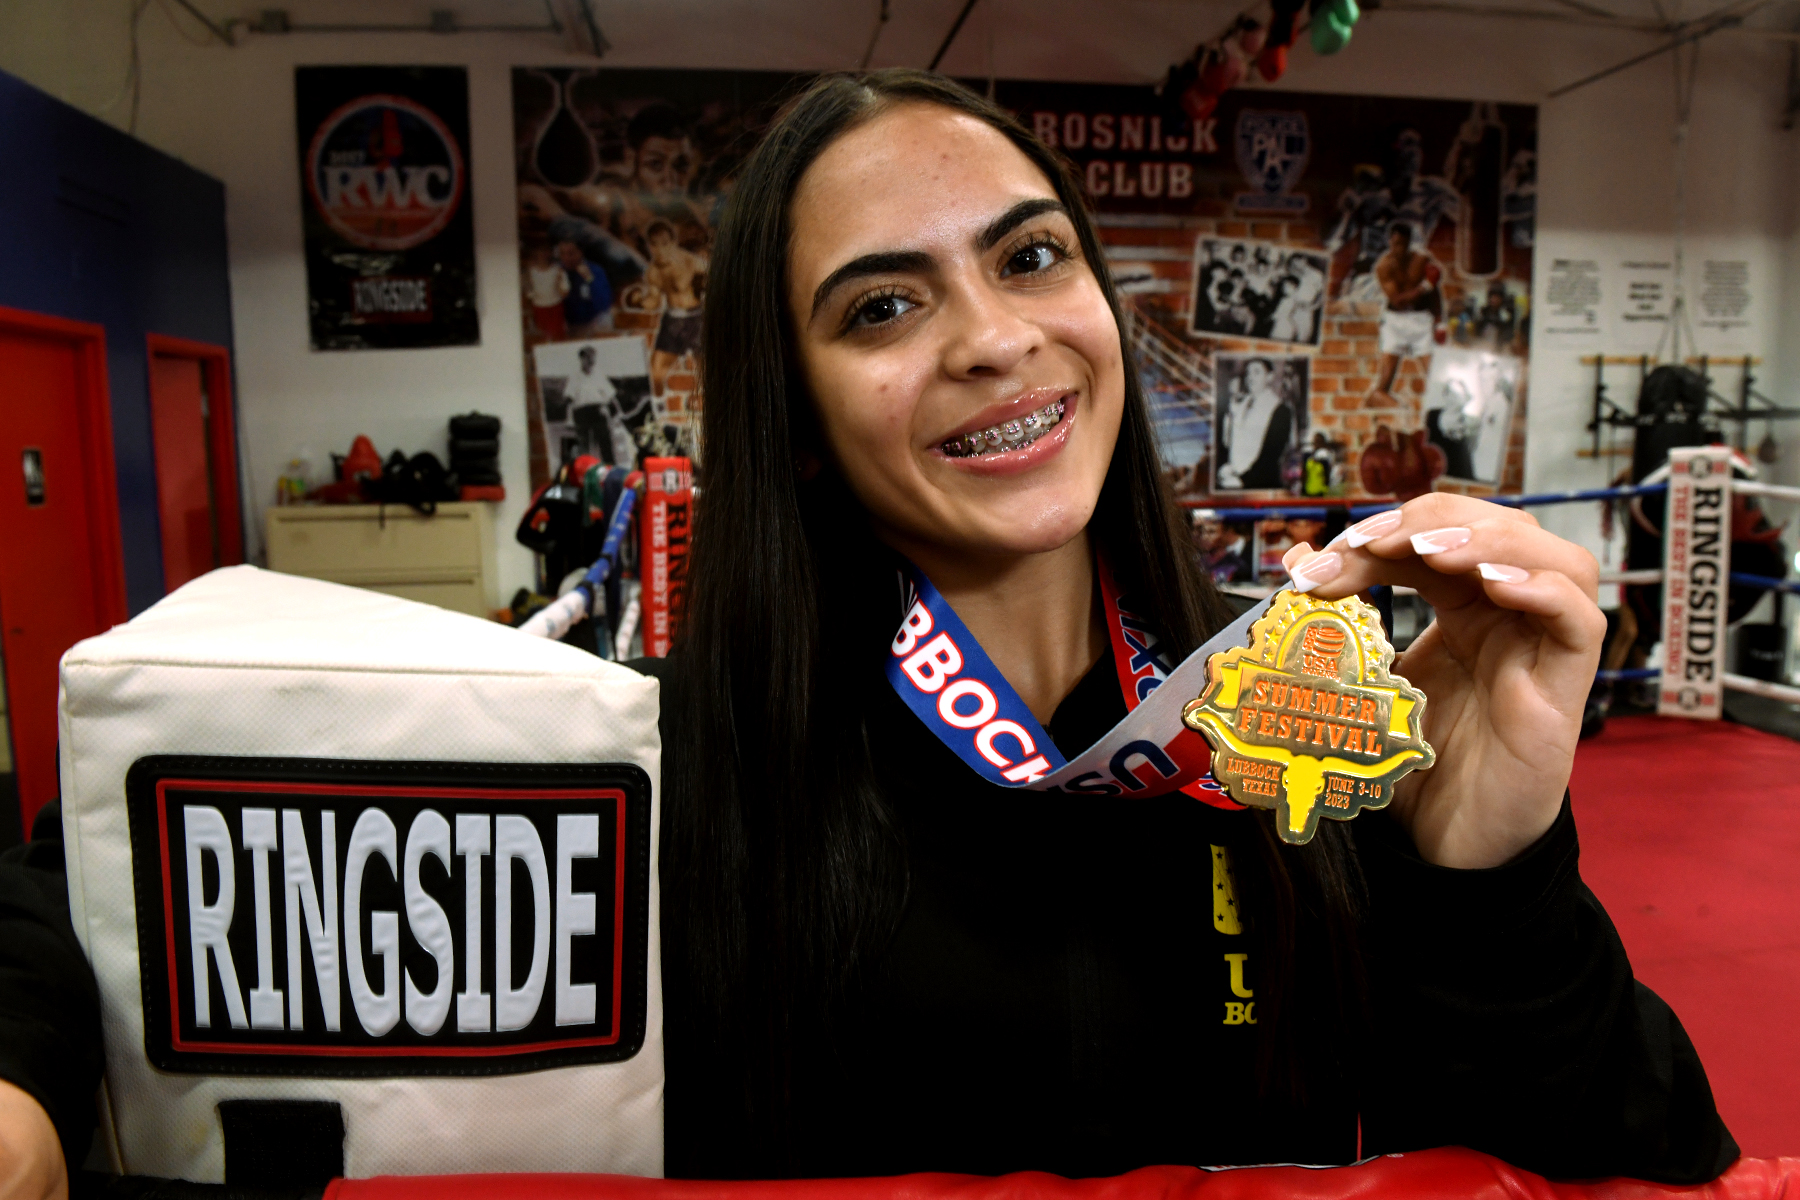 Hamden teen becomes US boxing champ, hopes to inspire other girls